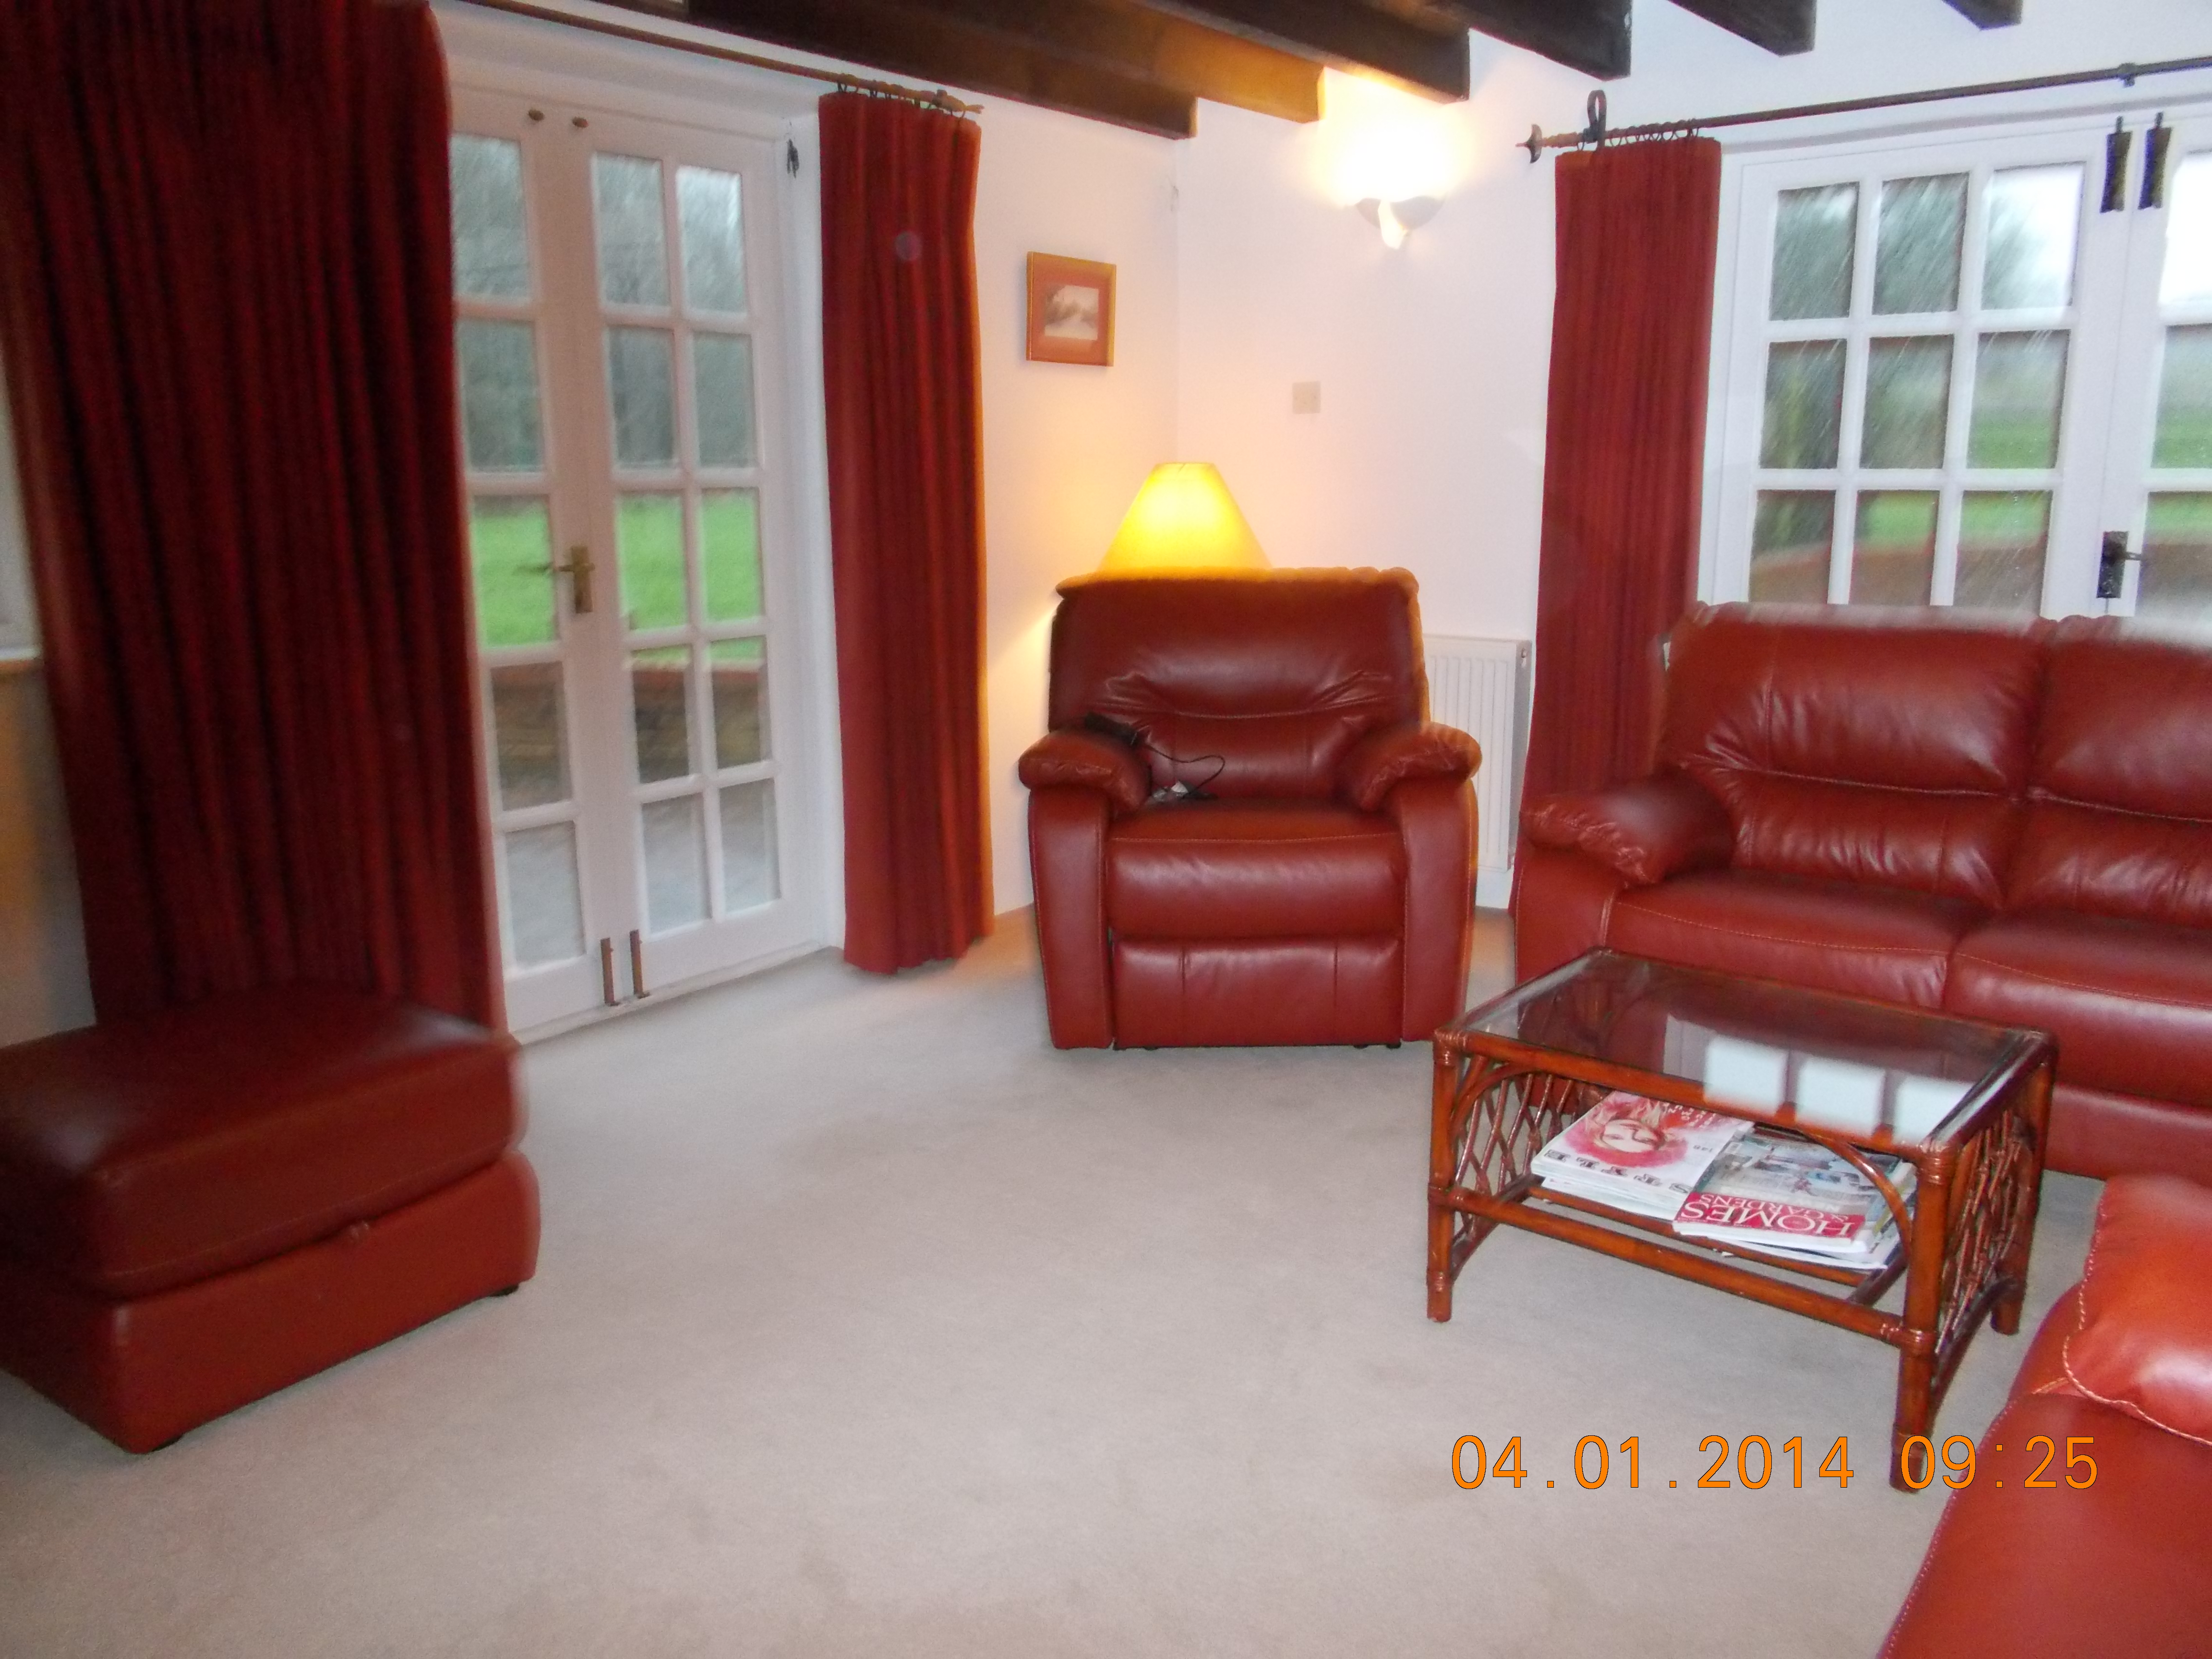 The South Wing Holiday Cottage Wimborne